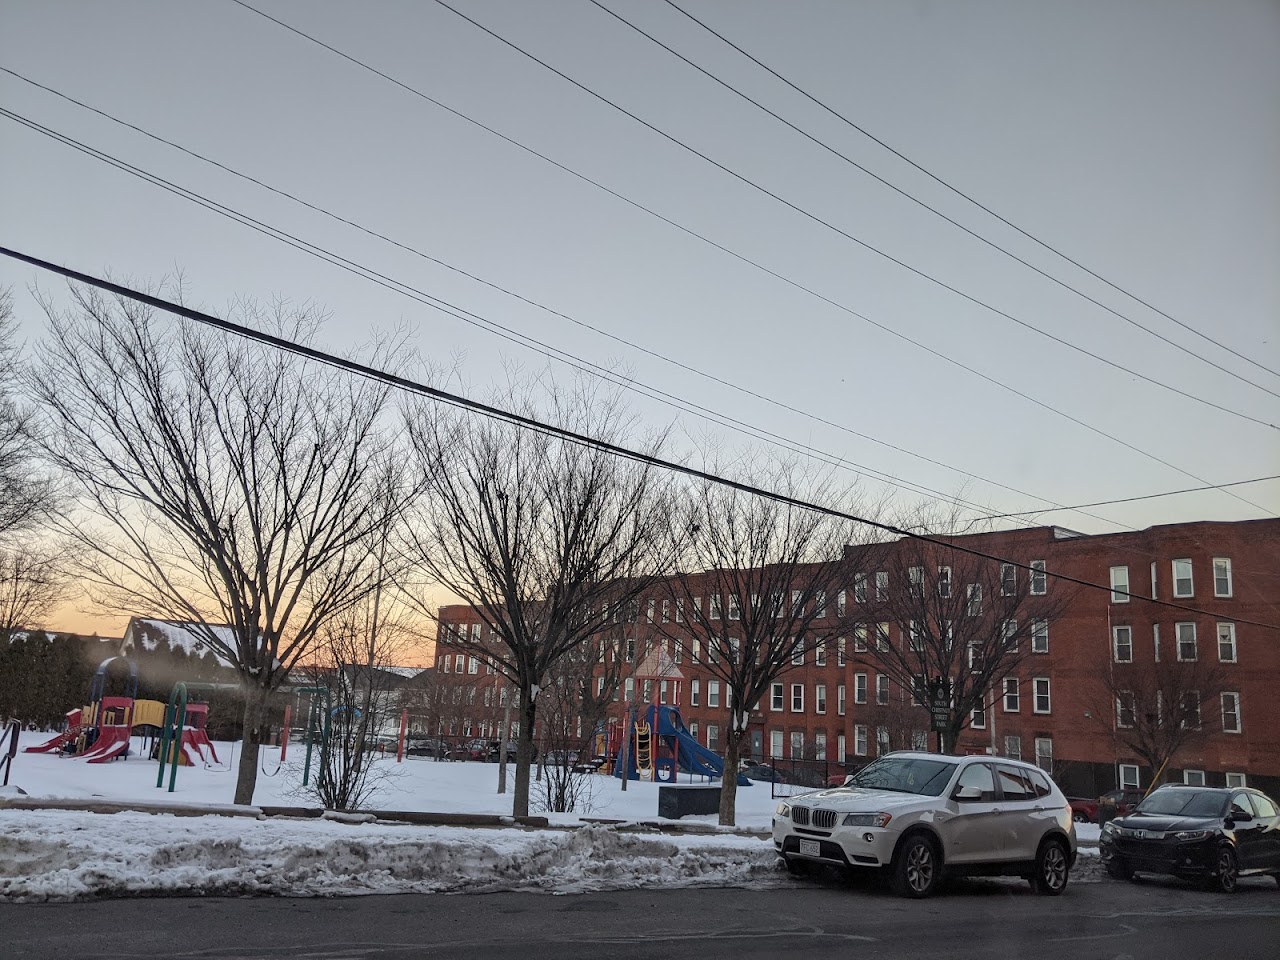 Photo of CHESTNUT PARK APARTMENTS. Affordable housing located at 70 CHESTNUT STREET HOLYOKE, MA 01040